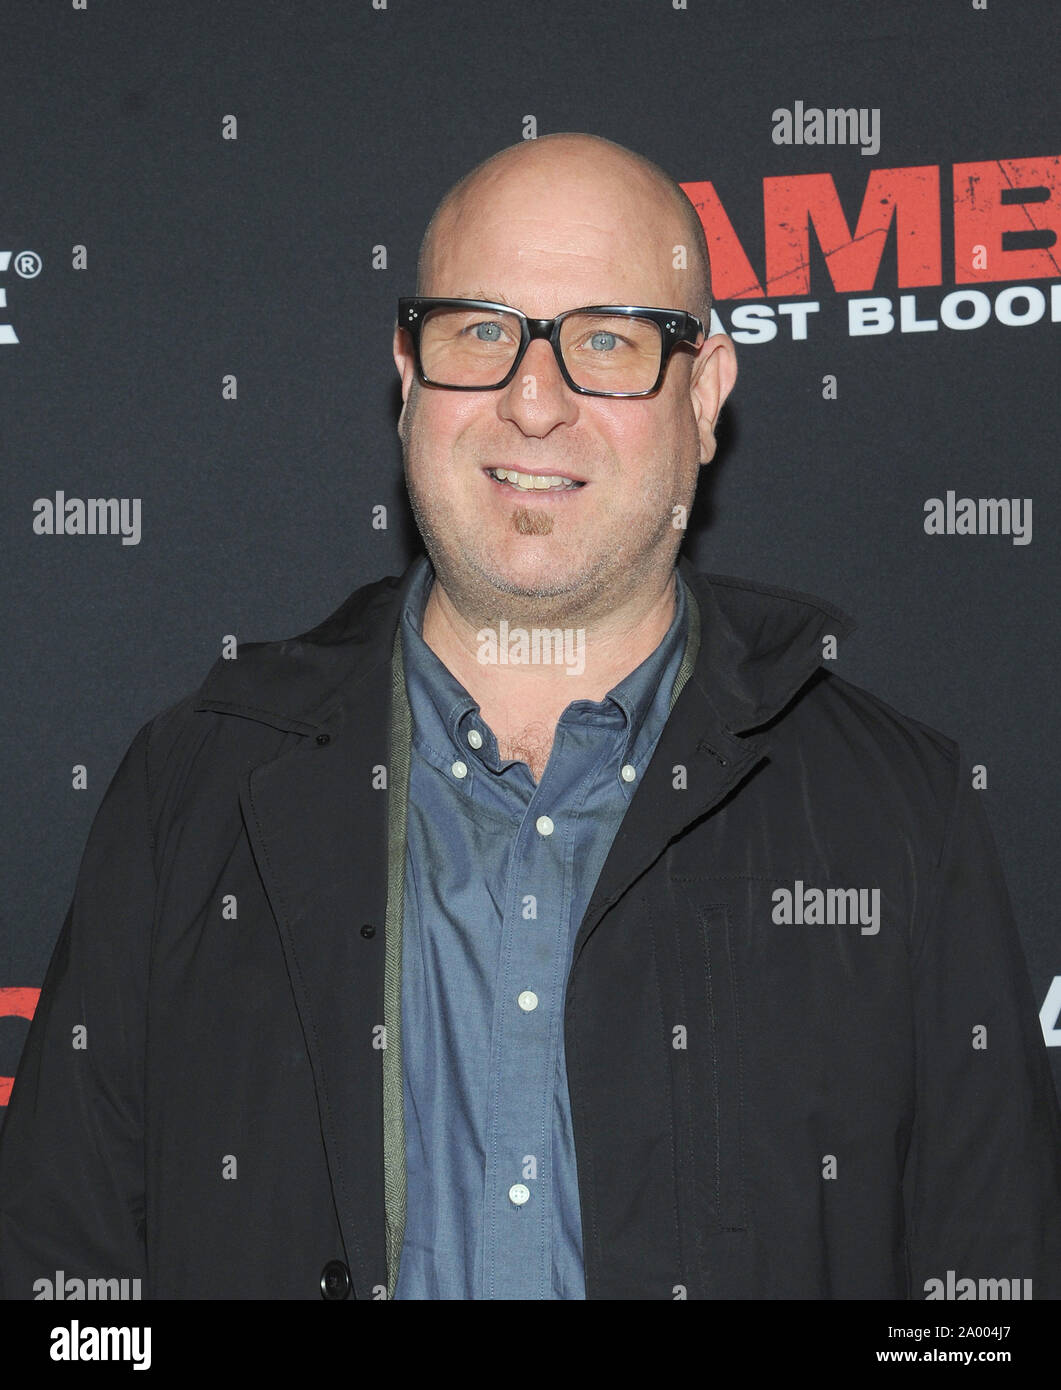 New York, NY, USA. 18th Sep, 2019. Adrian Grunberg attends the New York screening of 'Rambo: Last Blood' at AMC Lincoln Square on September 18, 2019 in New York City. Credit: John Palmer/Media Punch/Alamy Live News Stock Photo